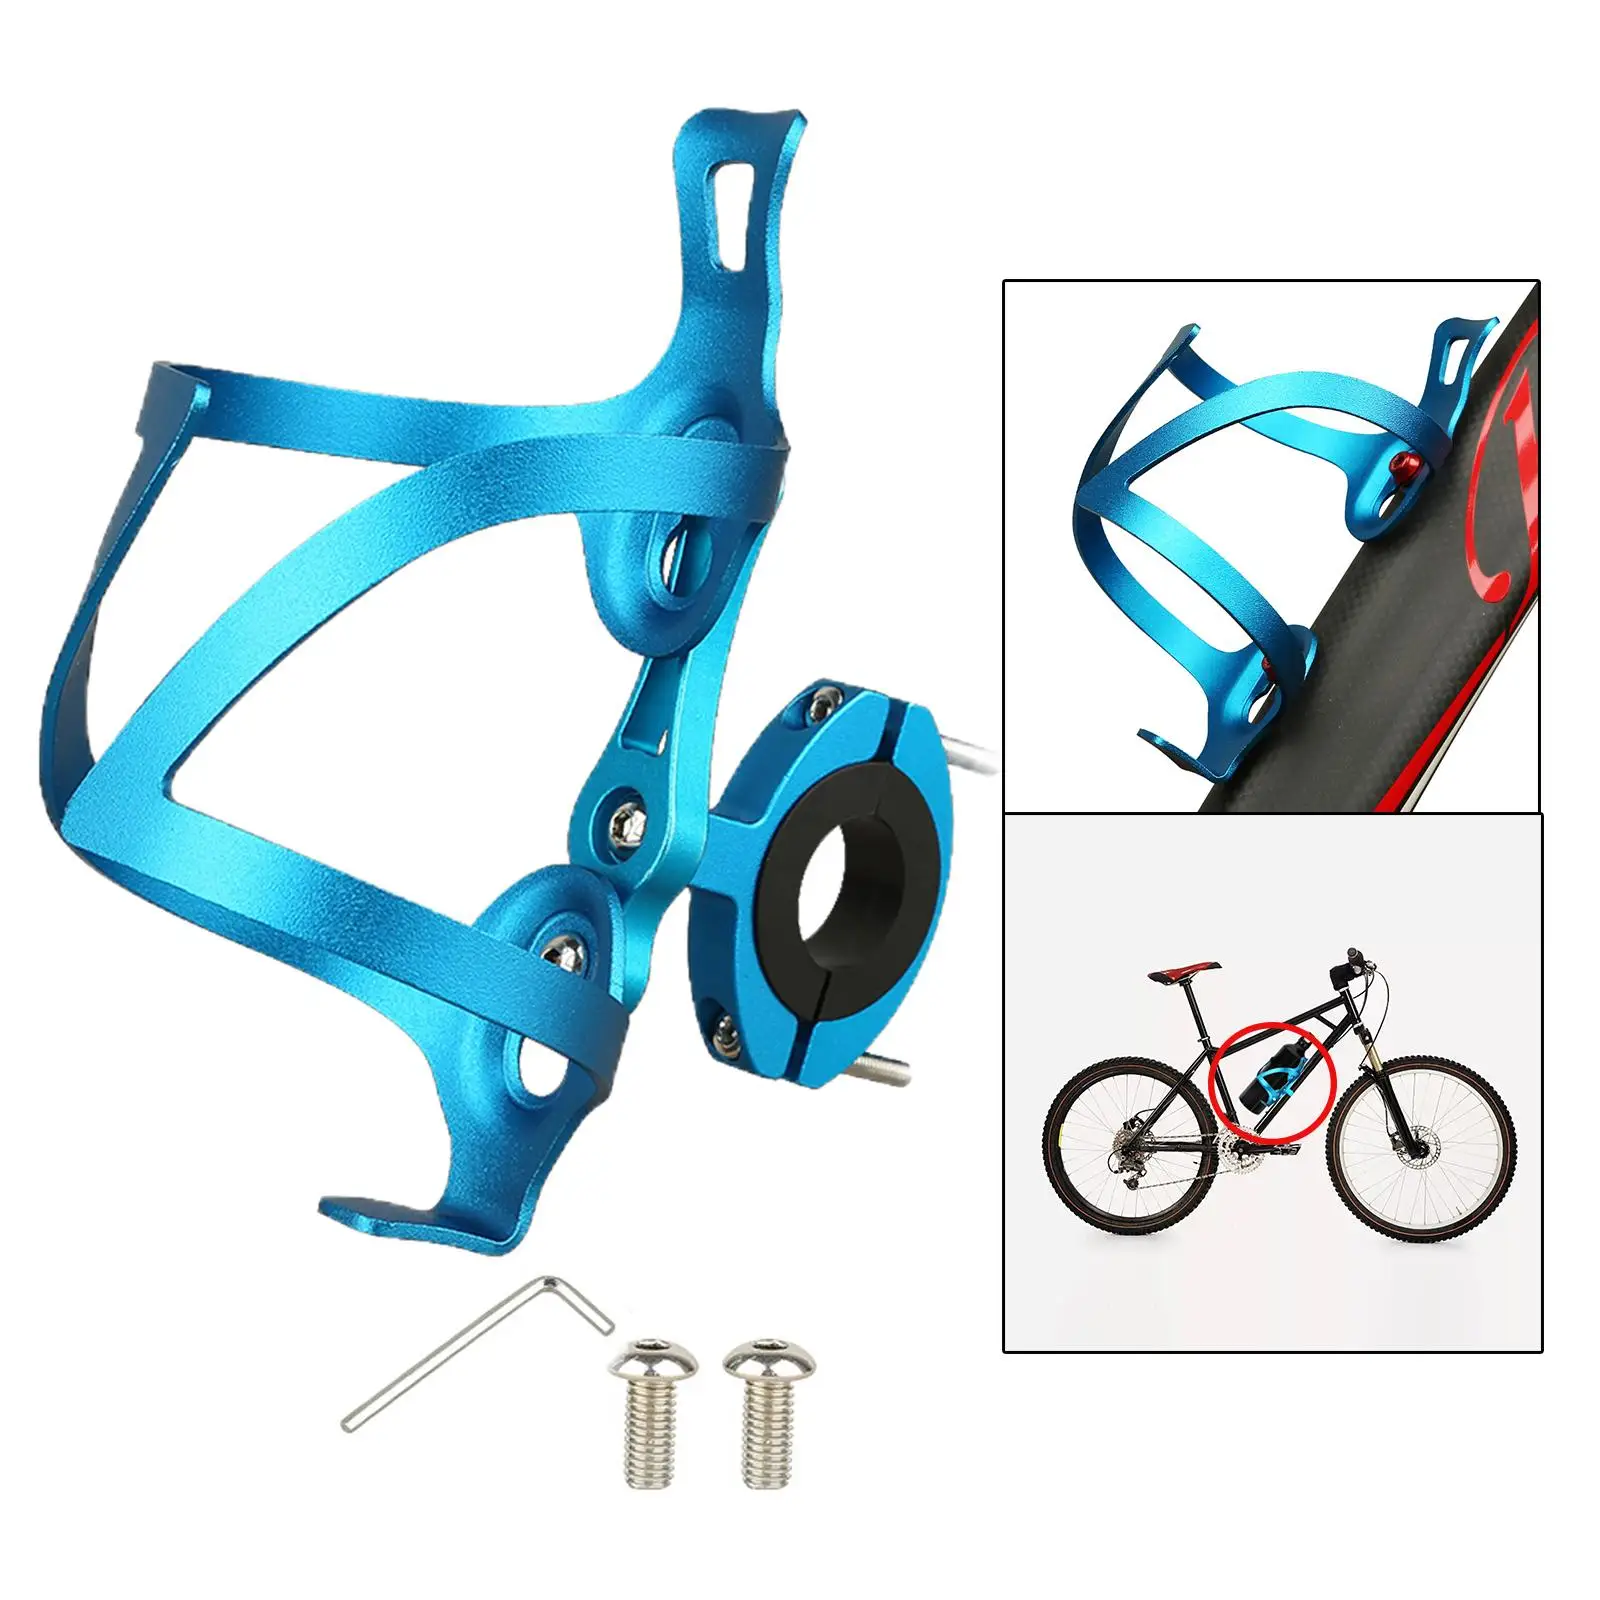 Aluminu Alloy Drink Water Bottle Cage Holder Mount Rack for Beverage Cycling